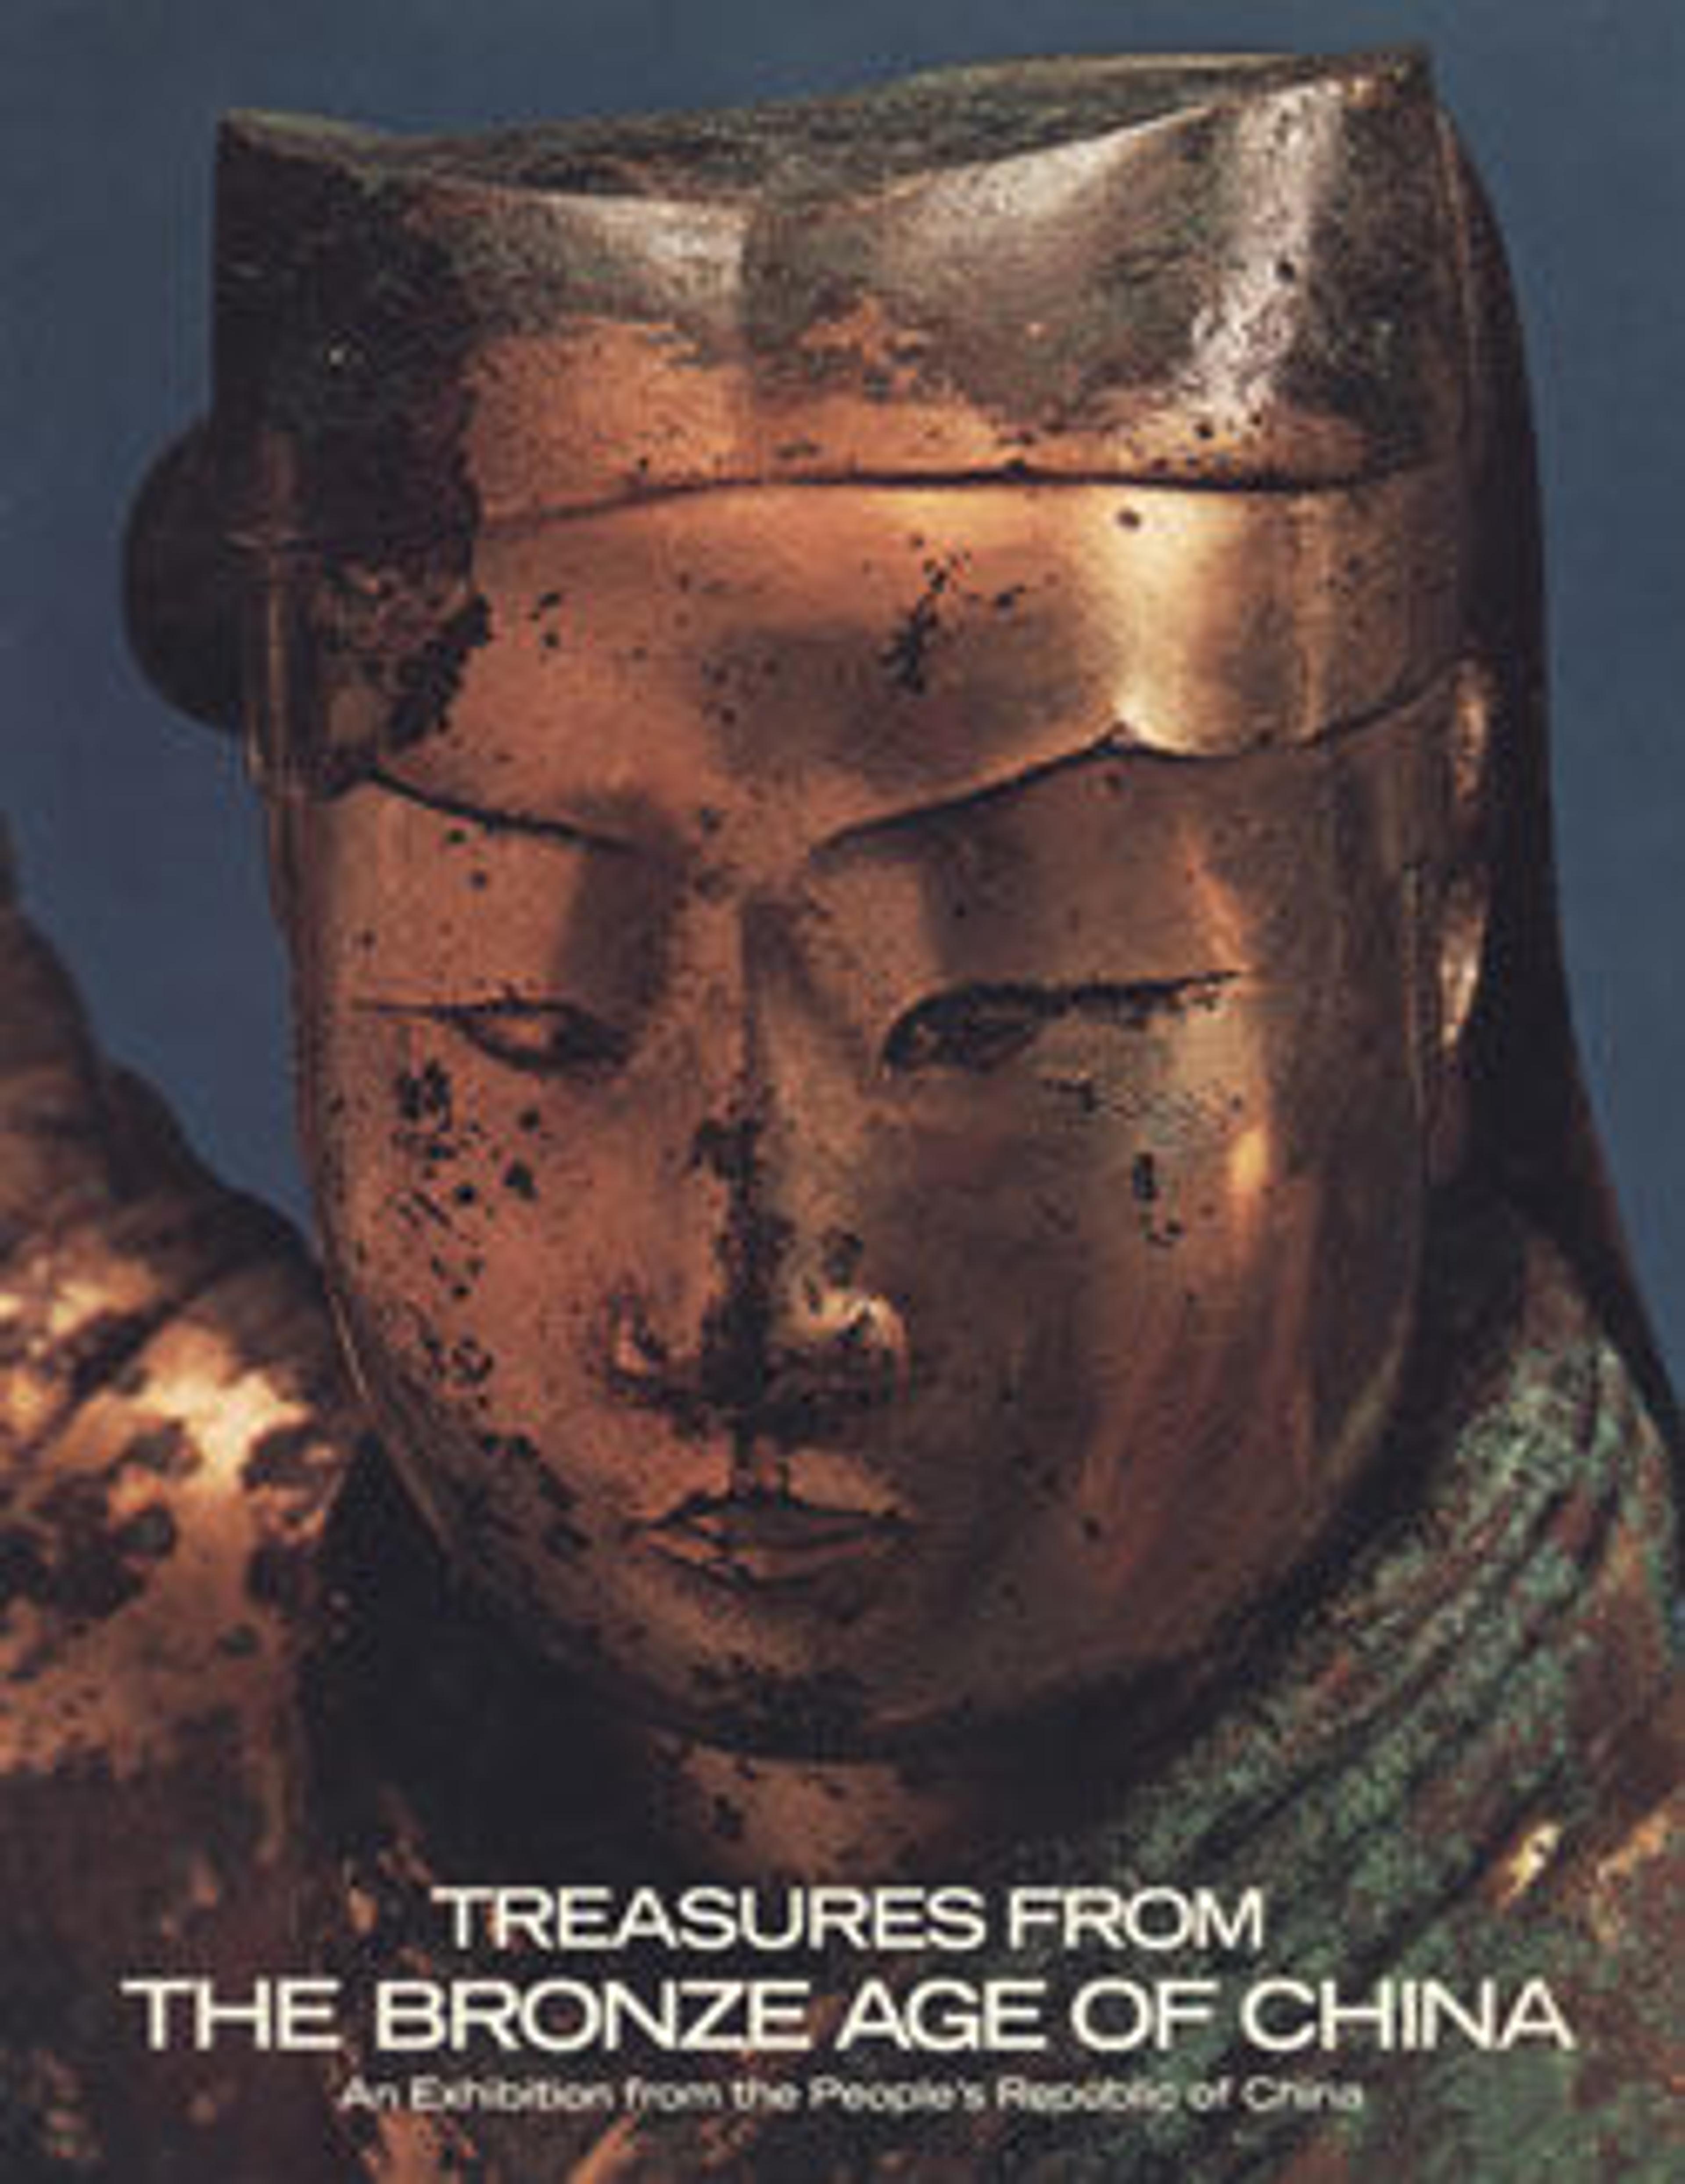 Treasures from the Bronze Age of China: An Exhibition from The People's Republic of China